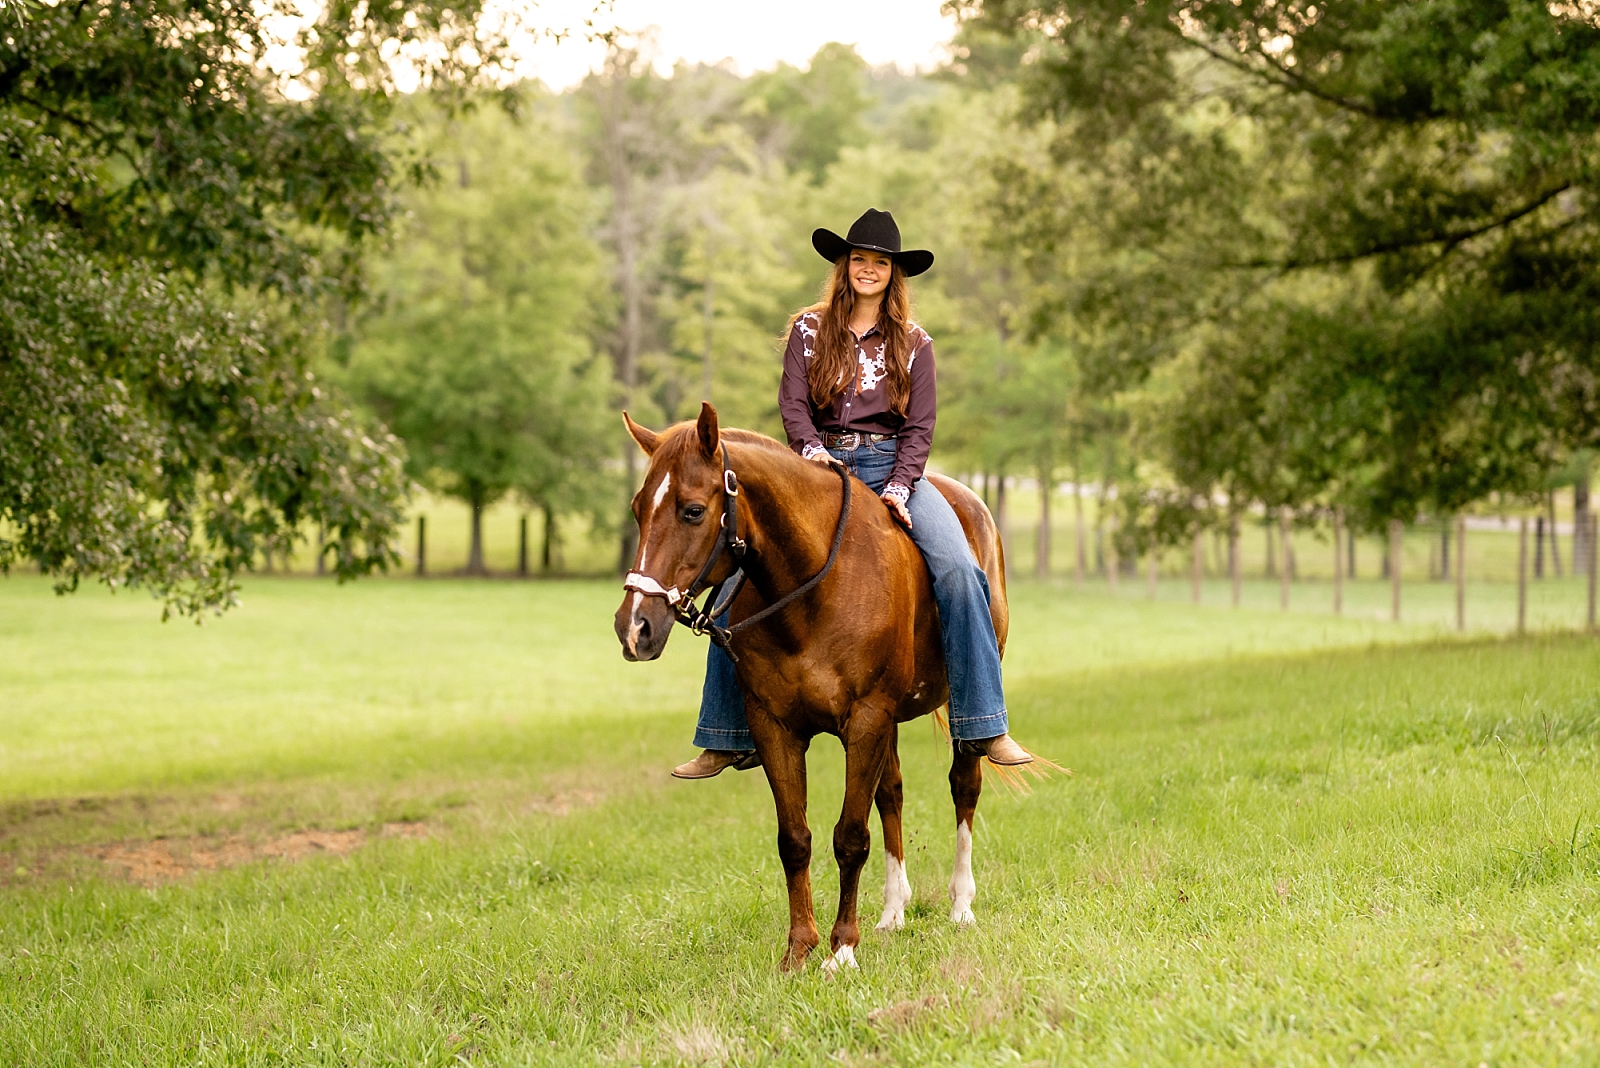 Barrel racing horse and rider take photos with professional equine photographer while bareback in a field.